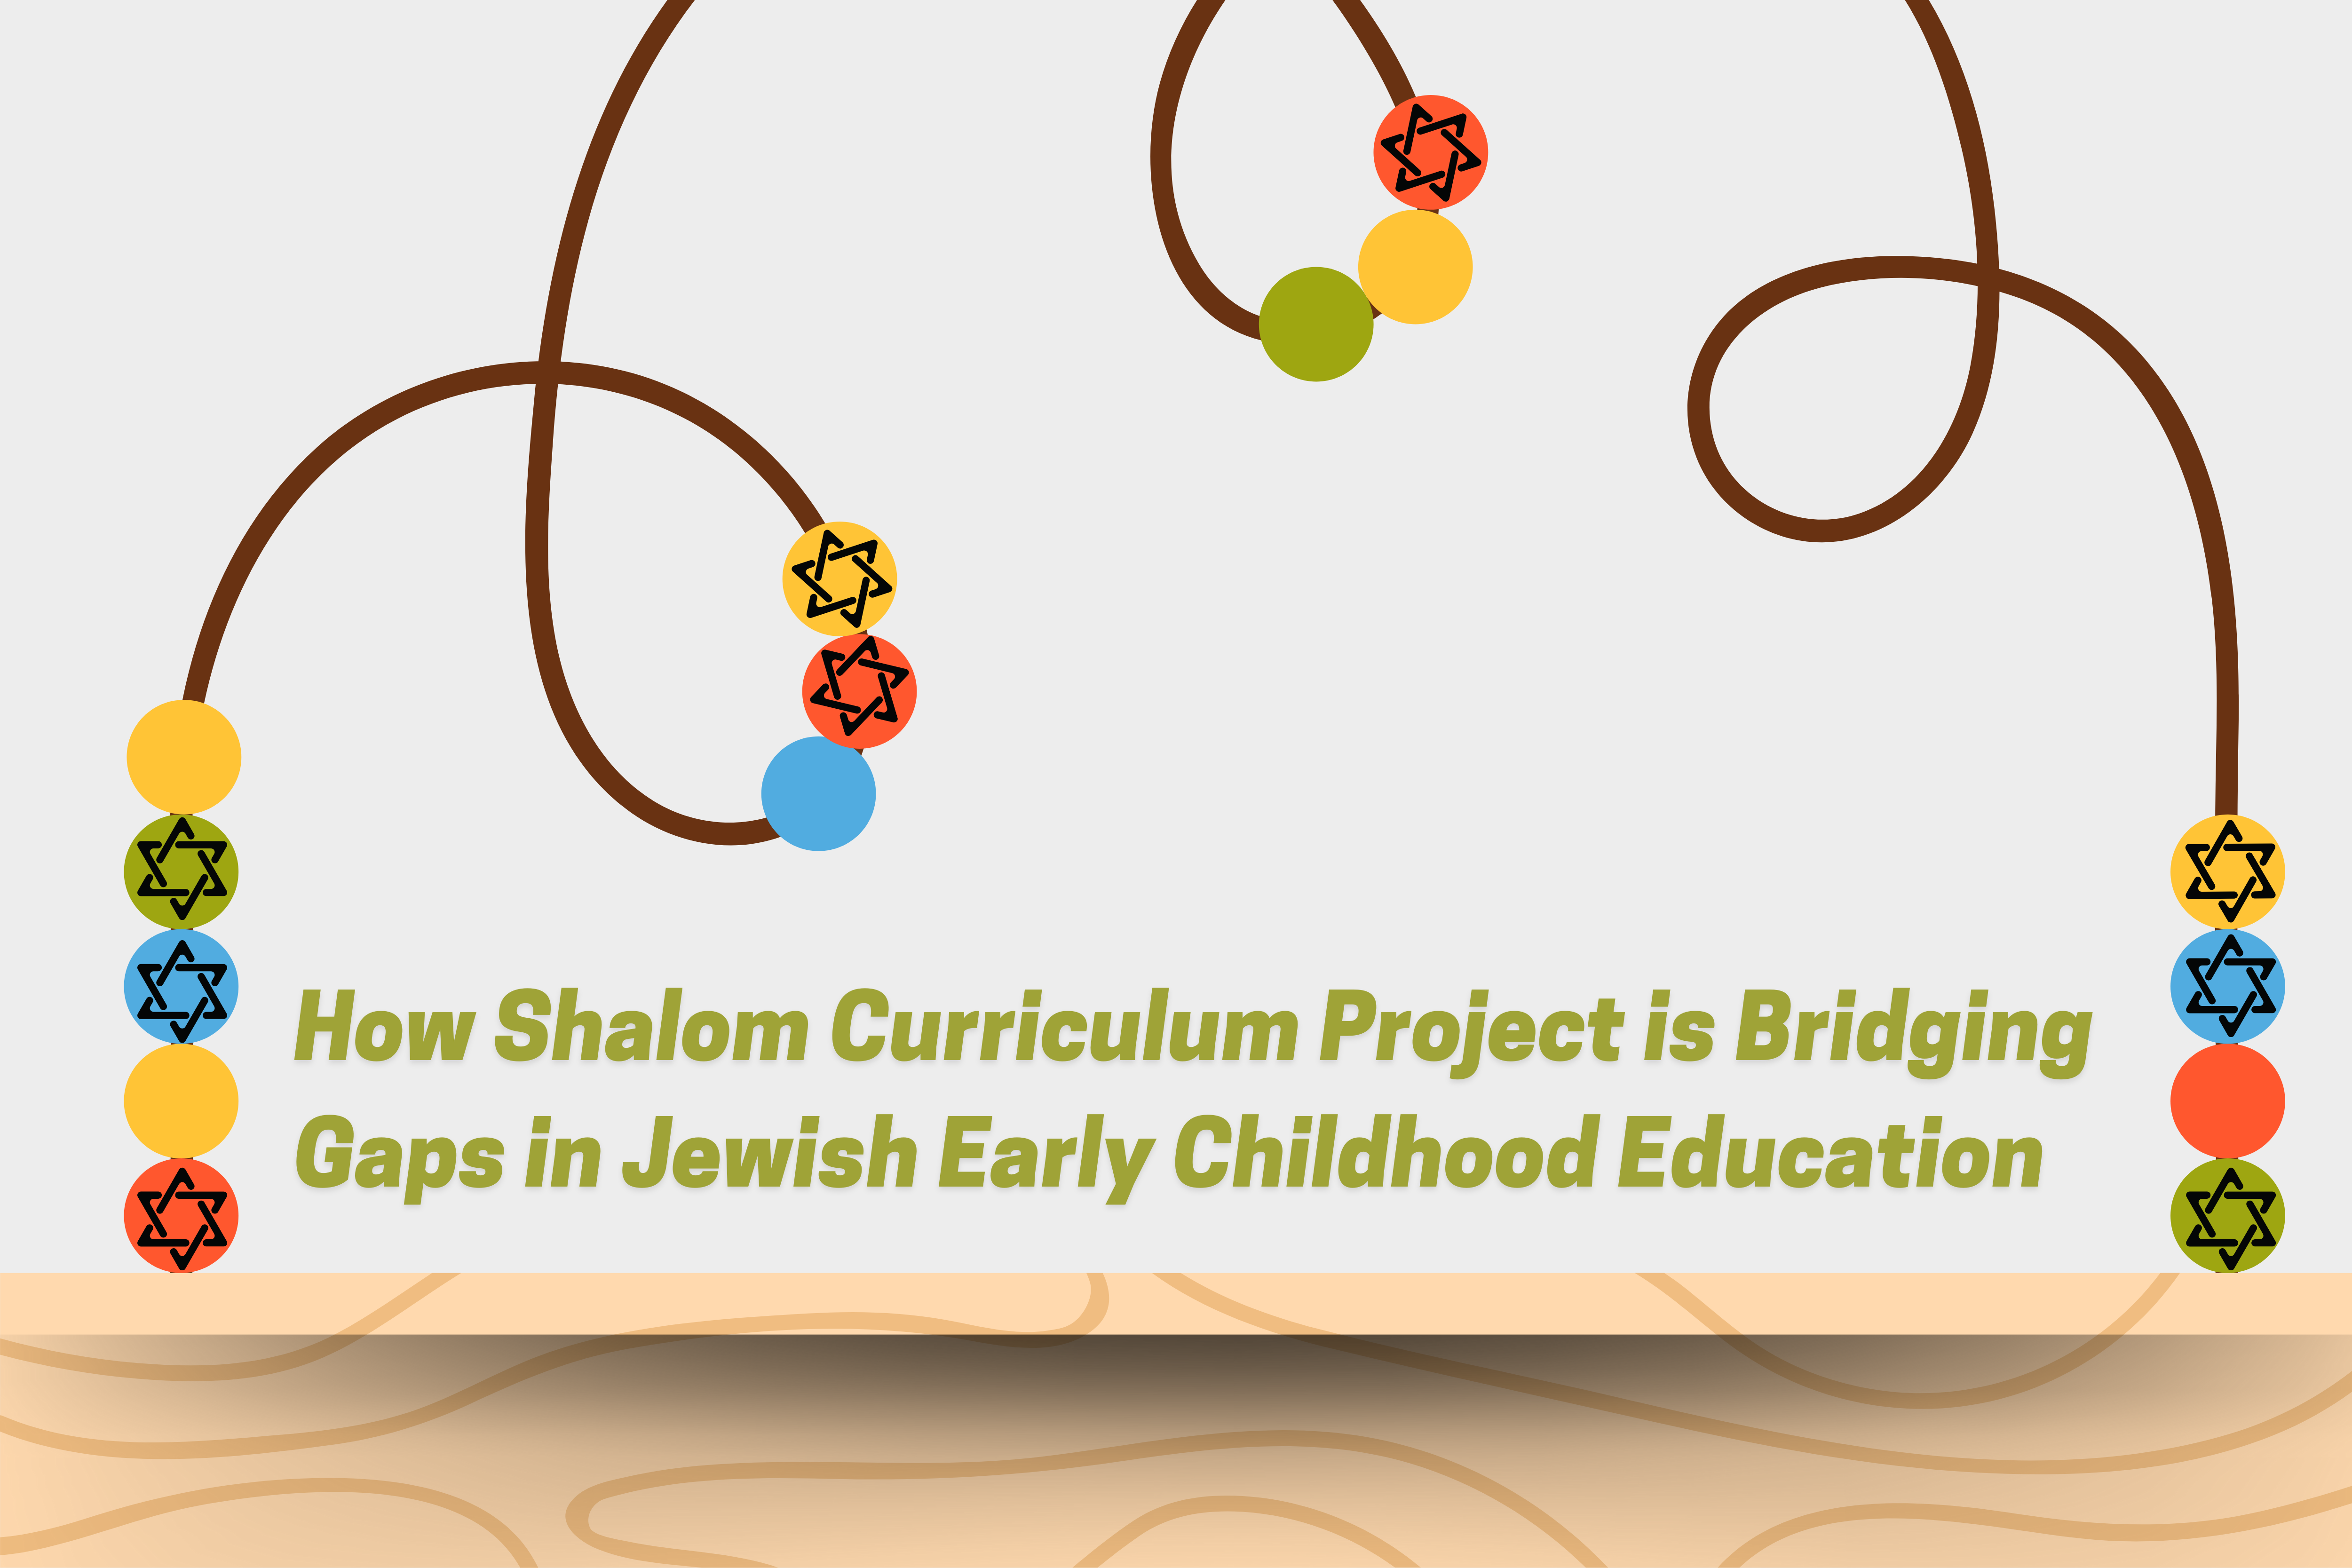 How Shalom Curriculum Project is Bridging Gaps in Jewish Early Childhood Education